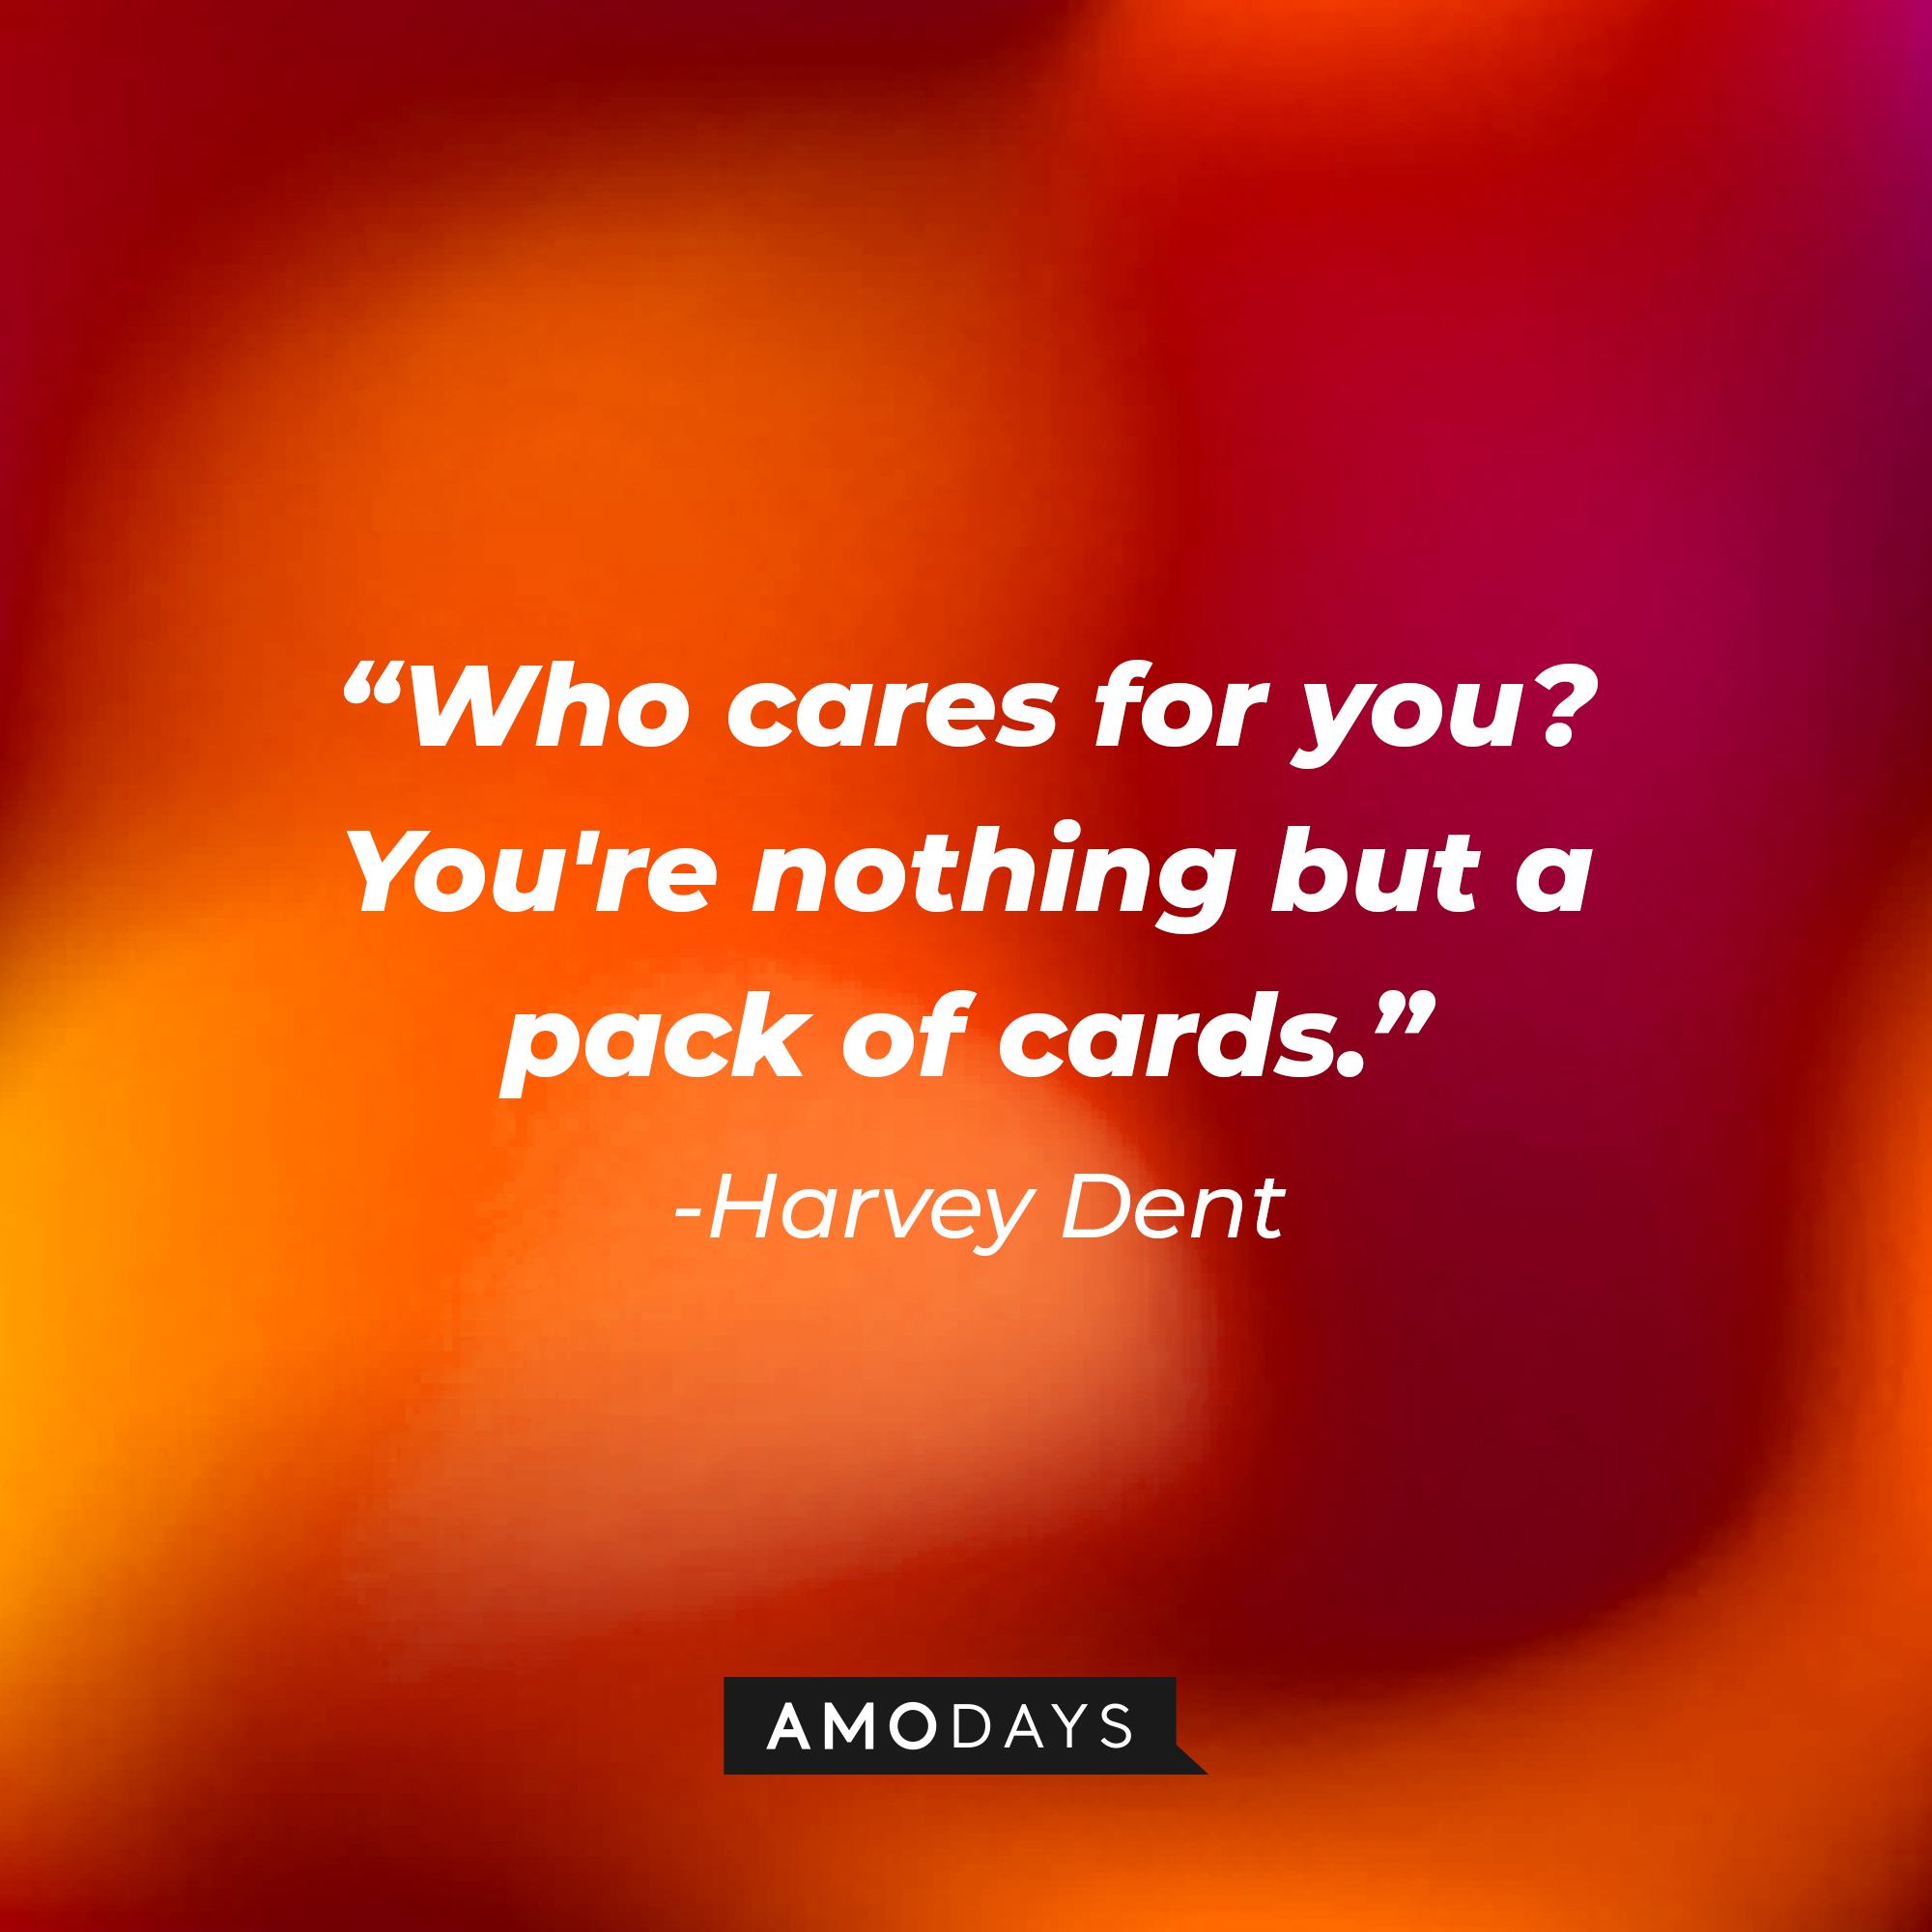 Harvey Dent's quote: “Who cares for you? You're nothing but a pack of cards.” | Source: Amodays